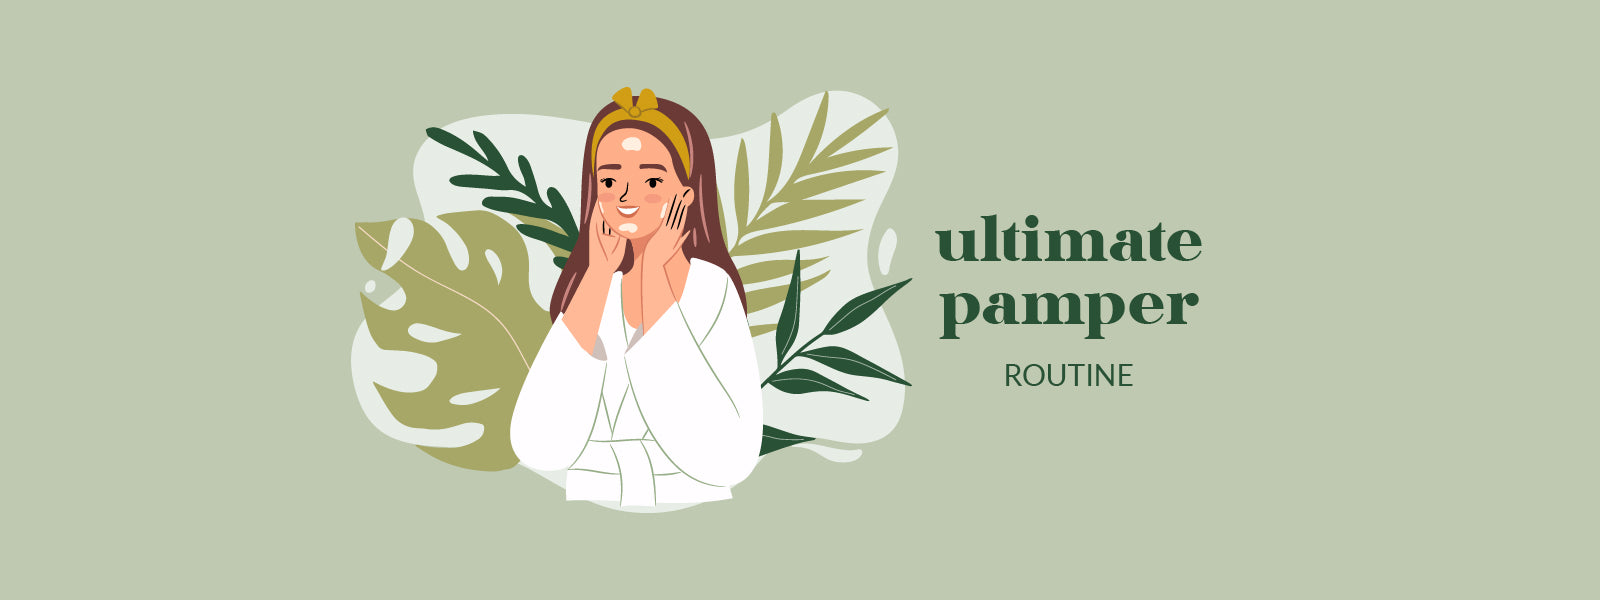 Skincare Series: Ultimate Pamper Routine